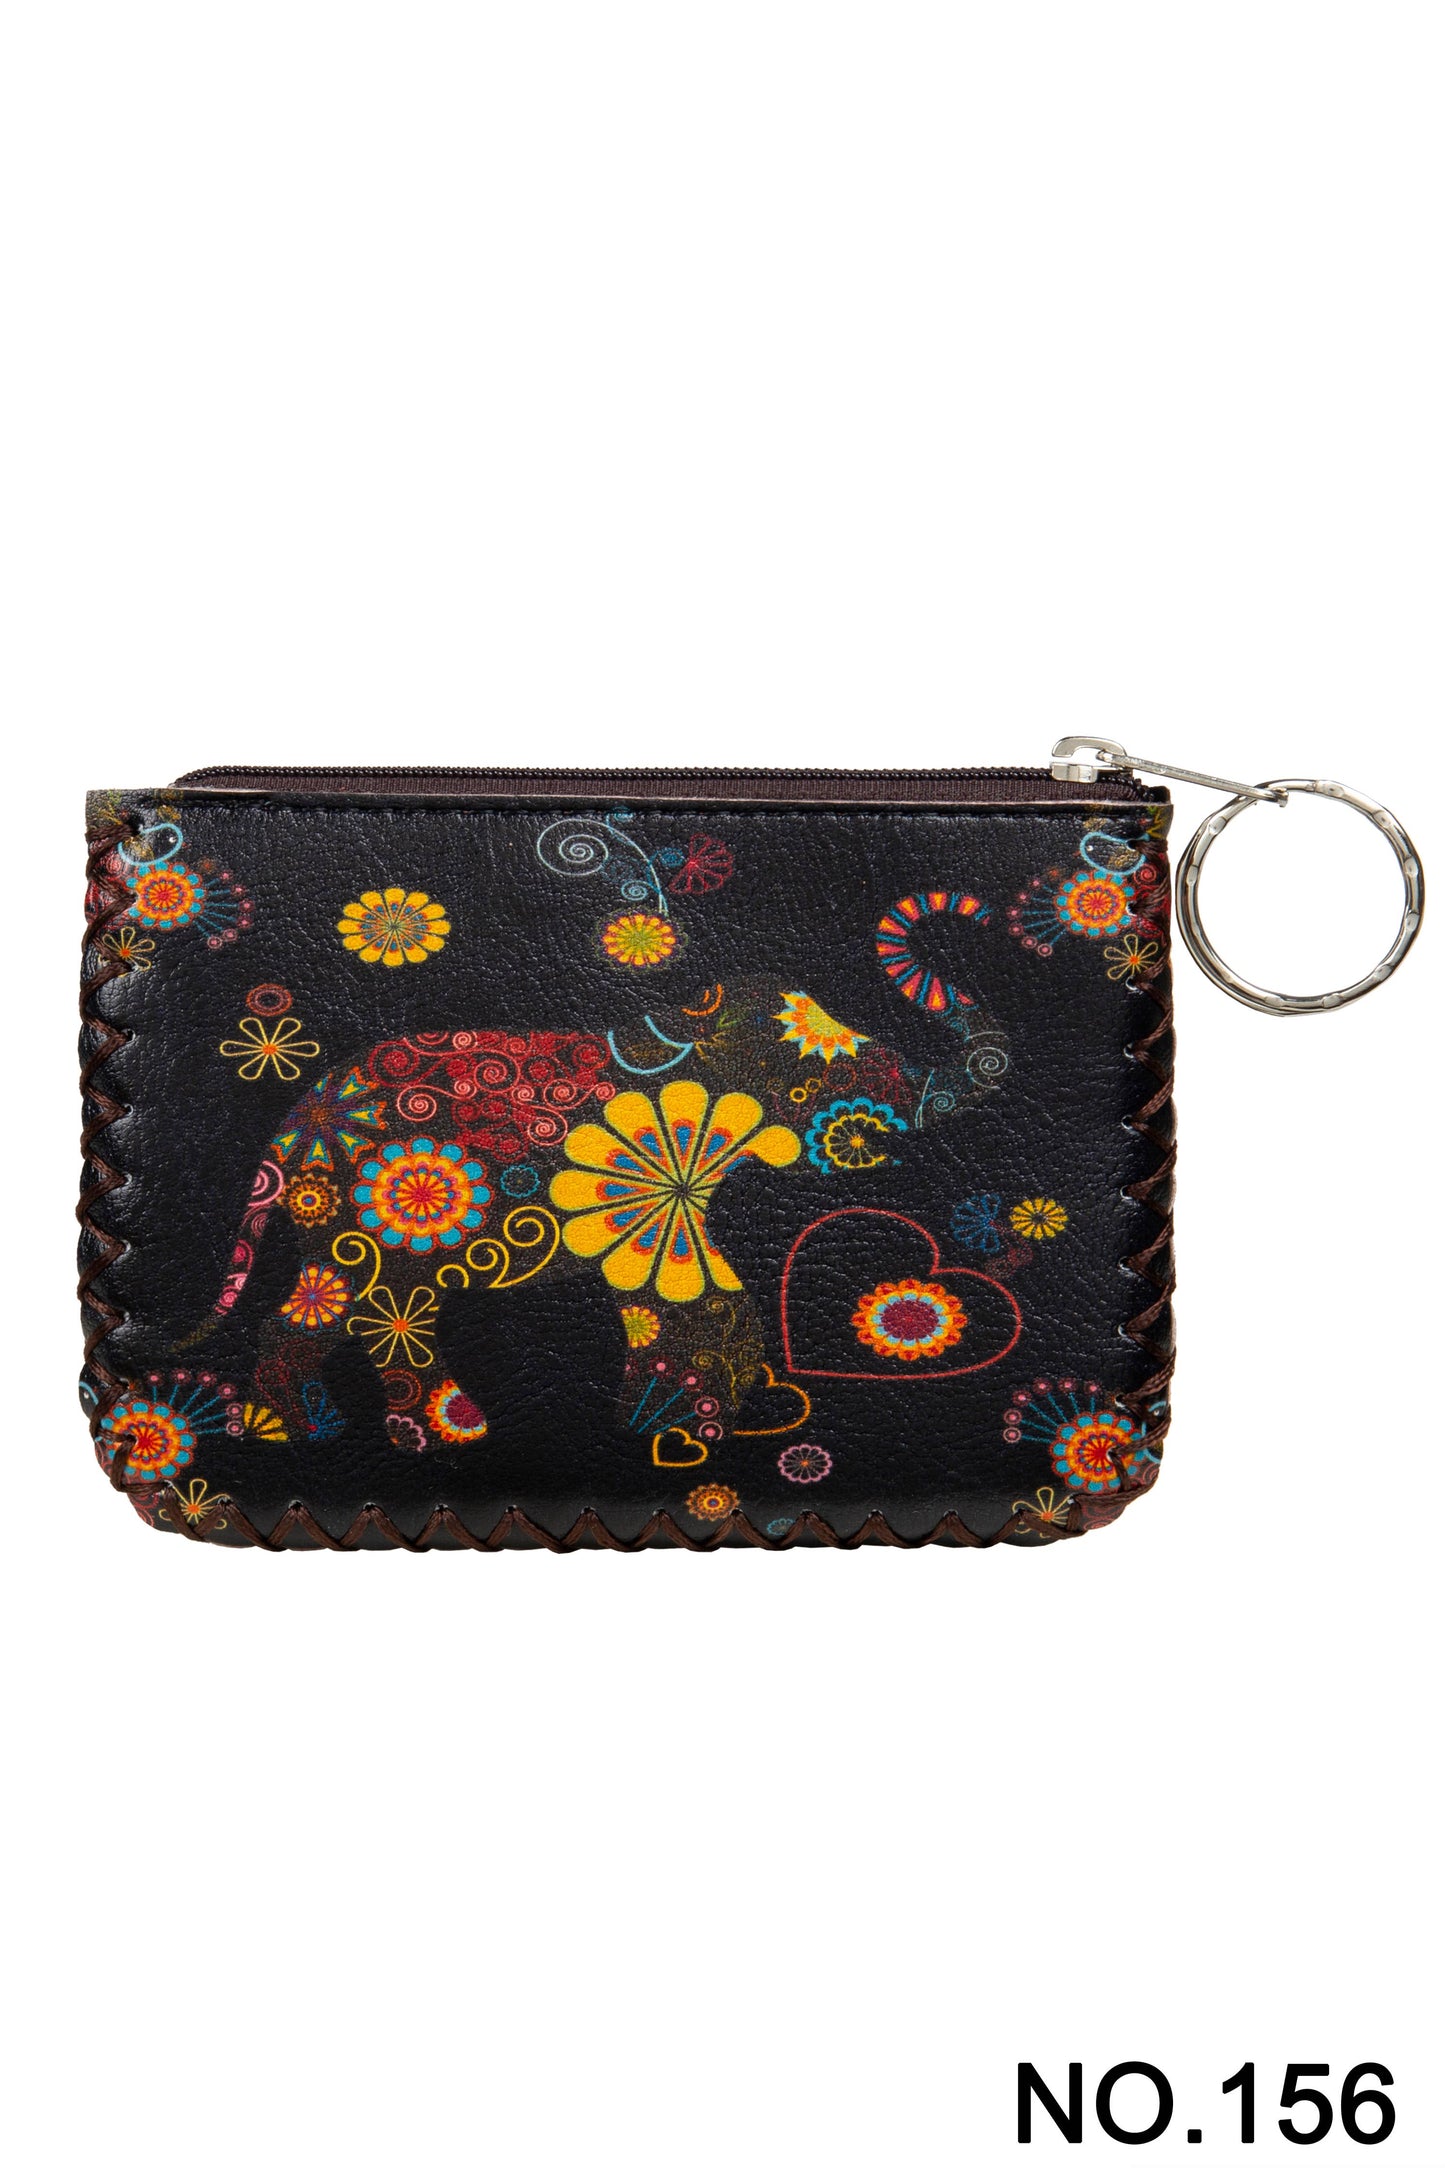 Ole - Floral Elephant Printed Coin Purse HB0665 - NO.156